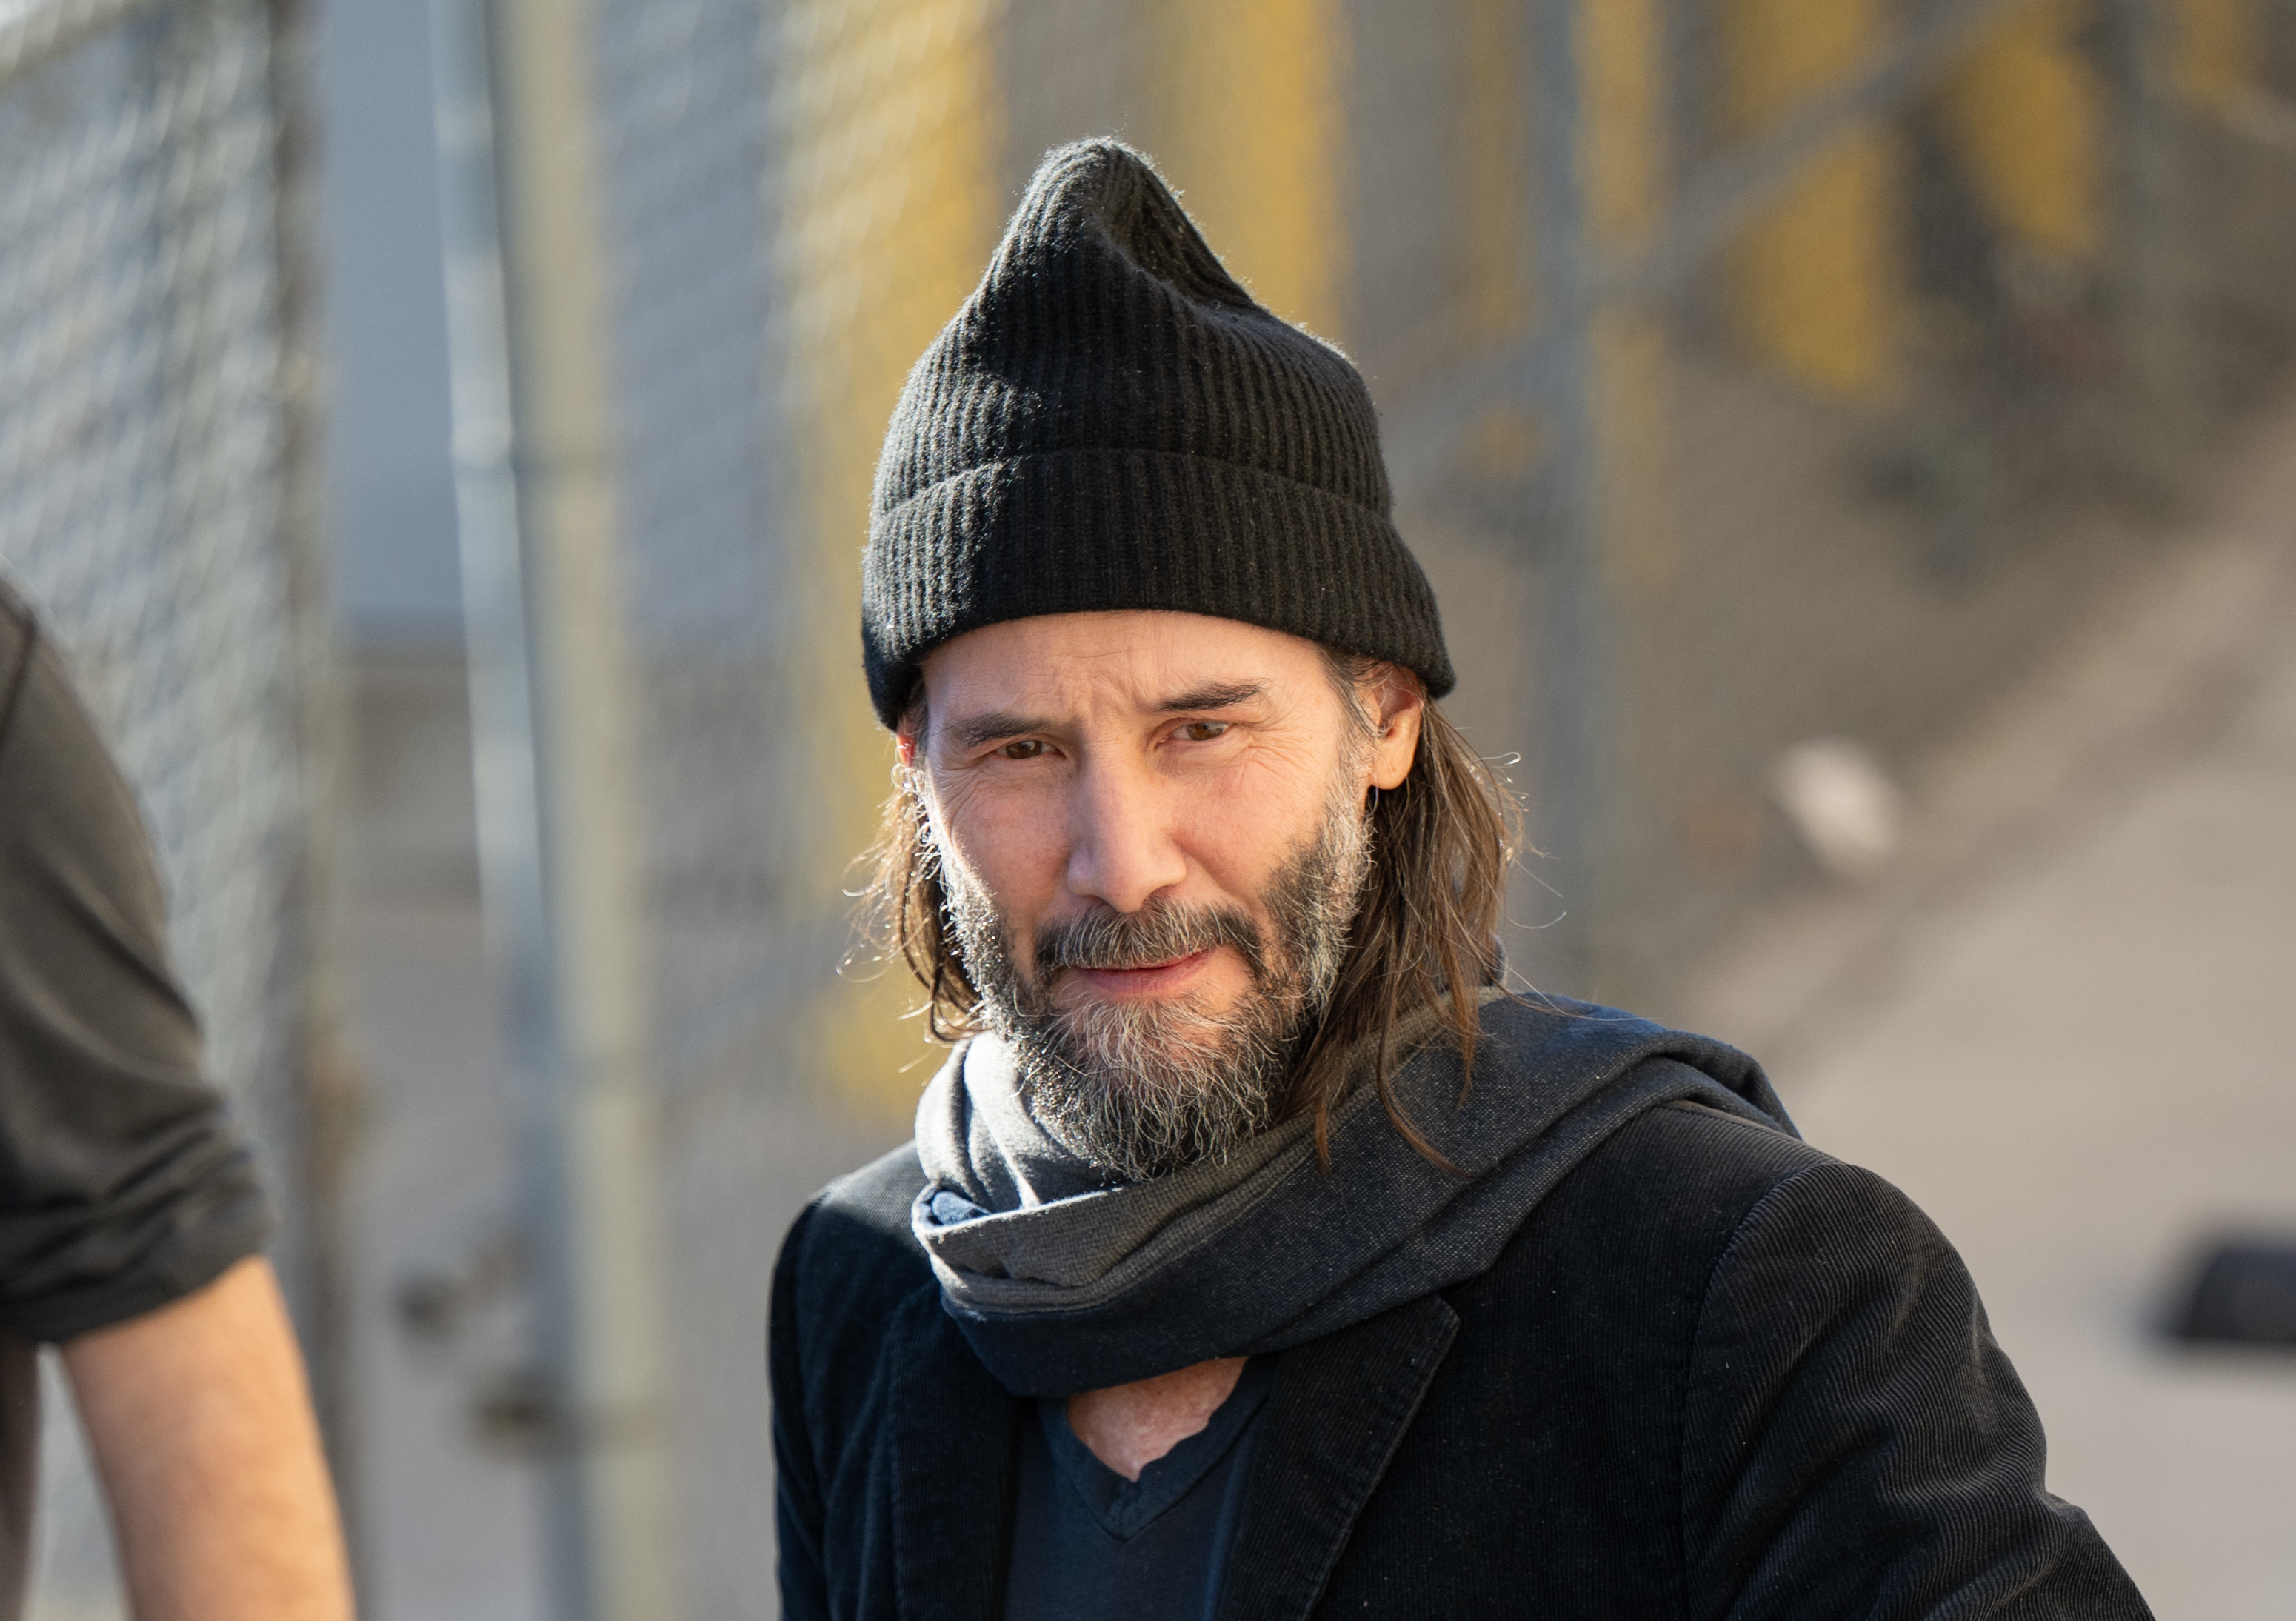 Man in beanie and scarf smiles outdoors. Celebrity, casual style